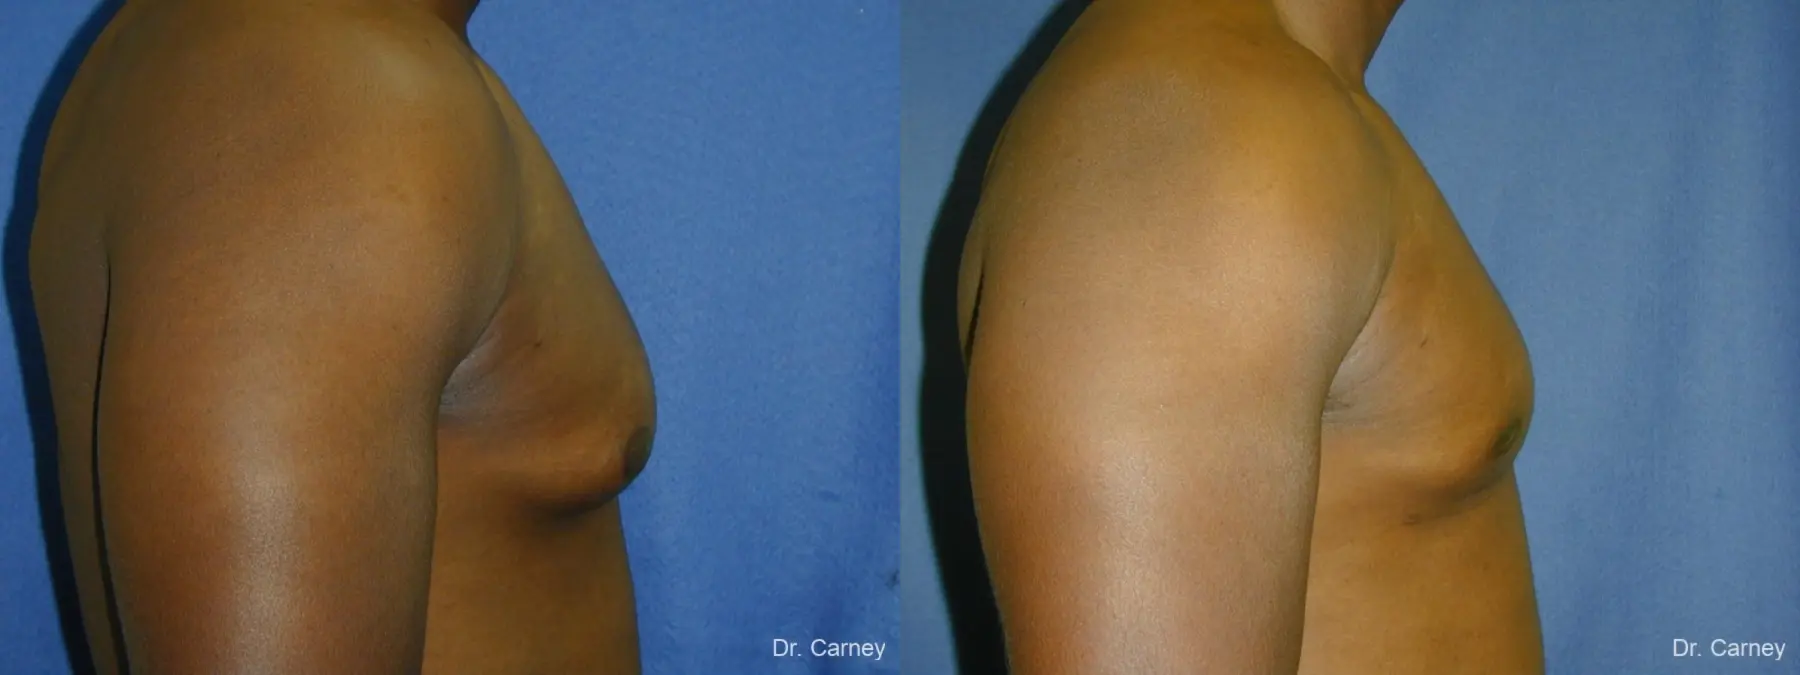 Virginia Beach Gynecomastia 1226 - Before and After 4